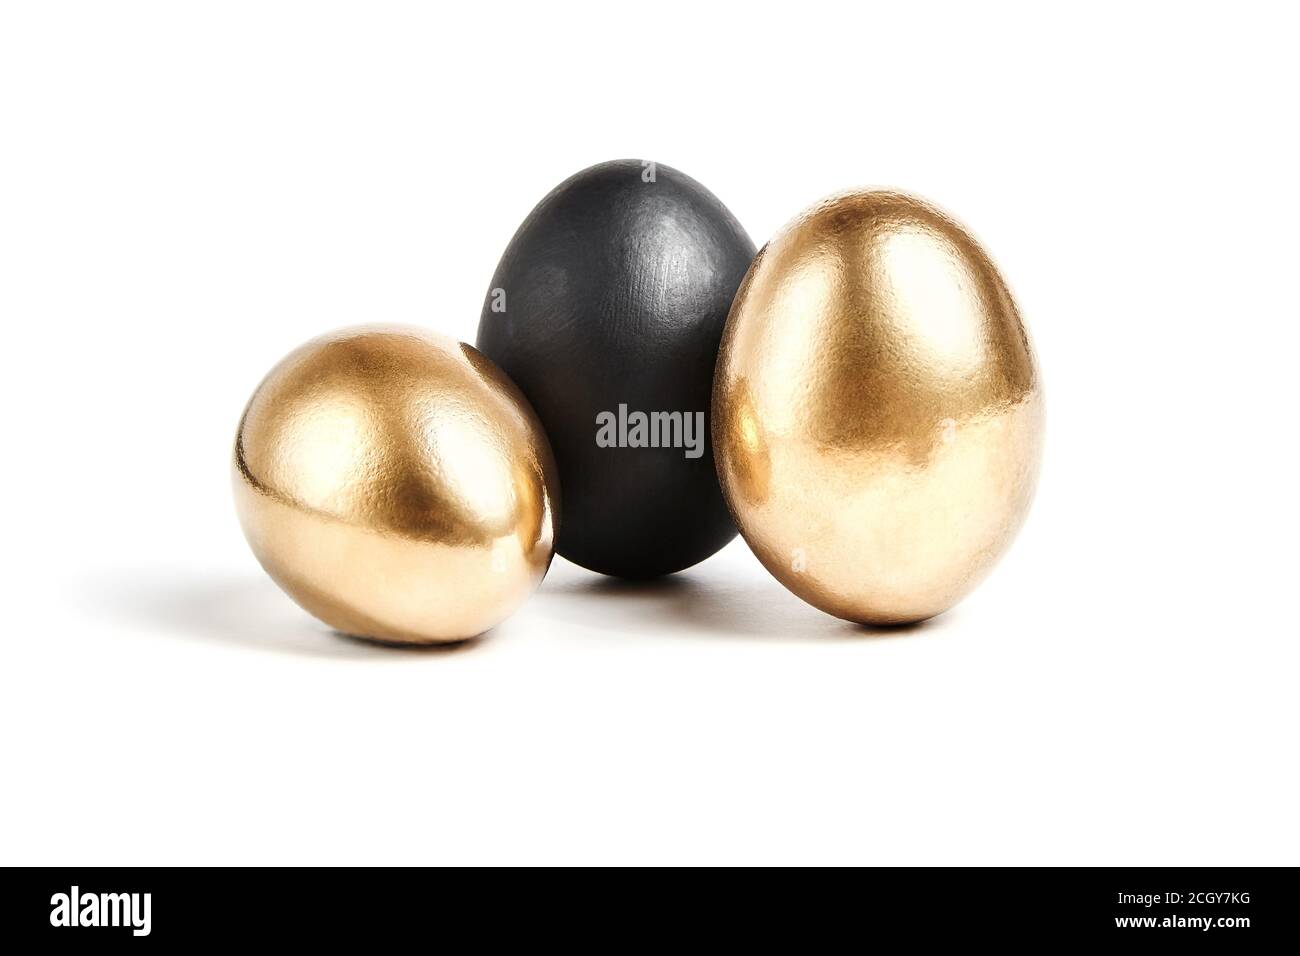 Black and two golden eggs. Business concept: risky transaction or unreliable partner, success and failure Stock Photo